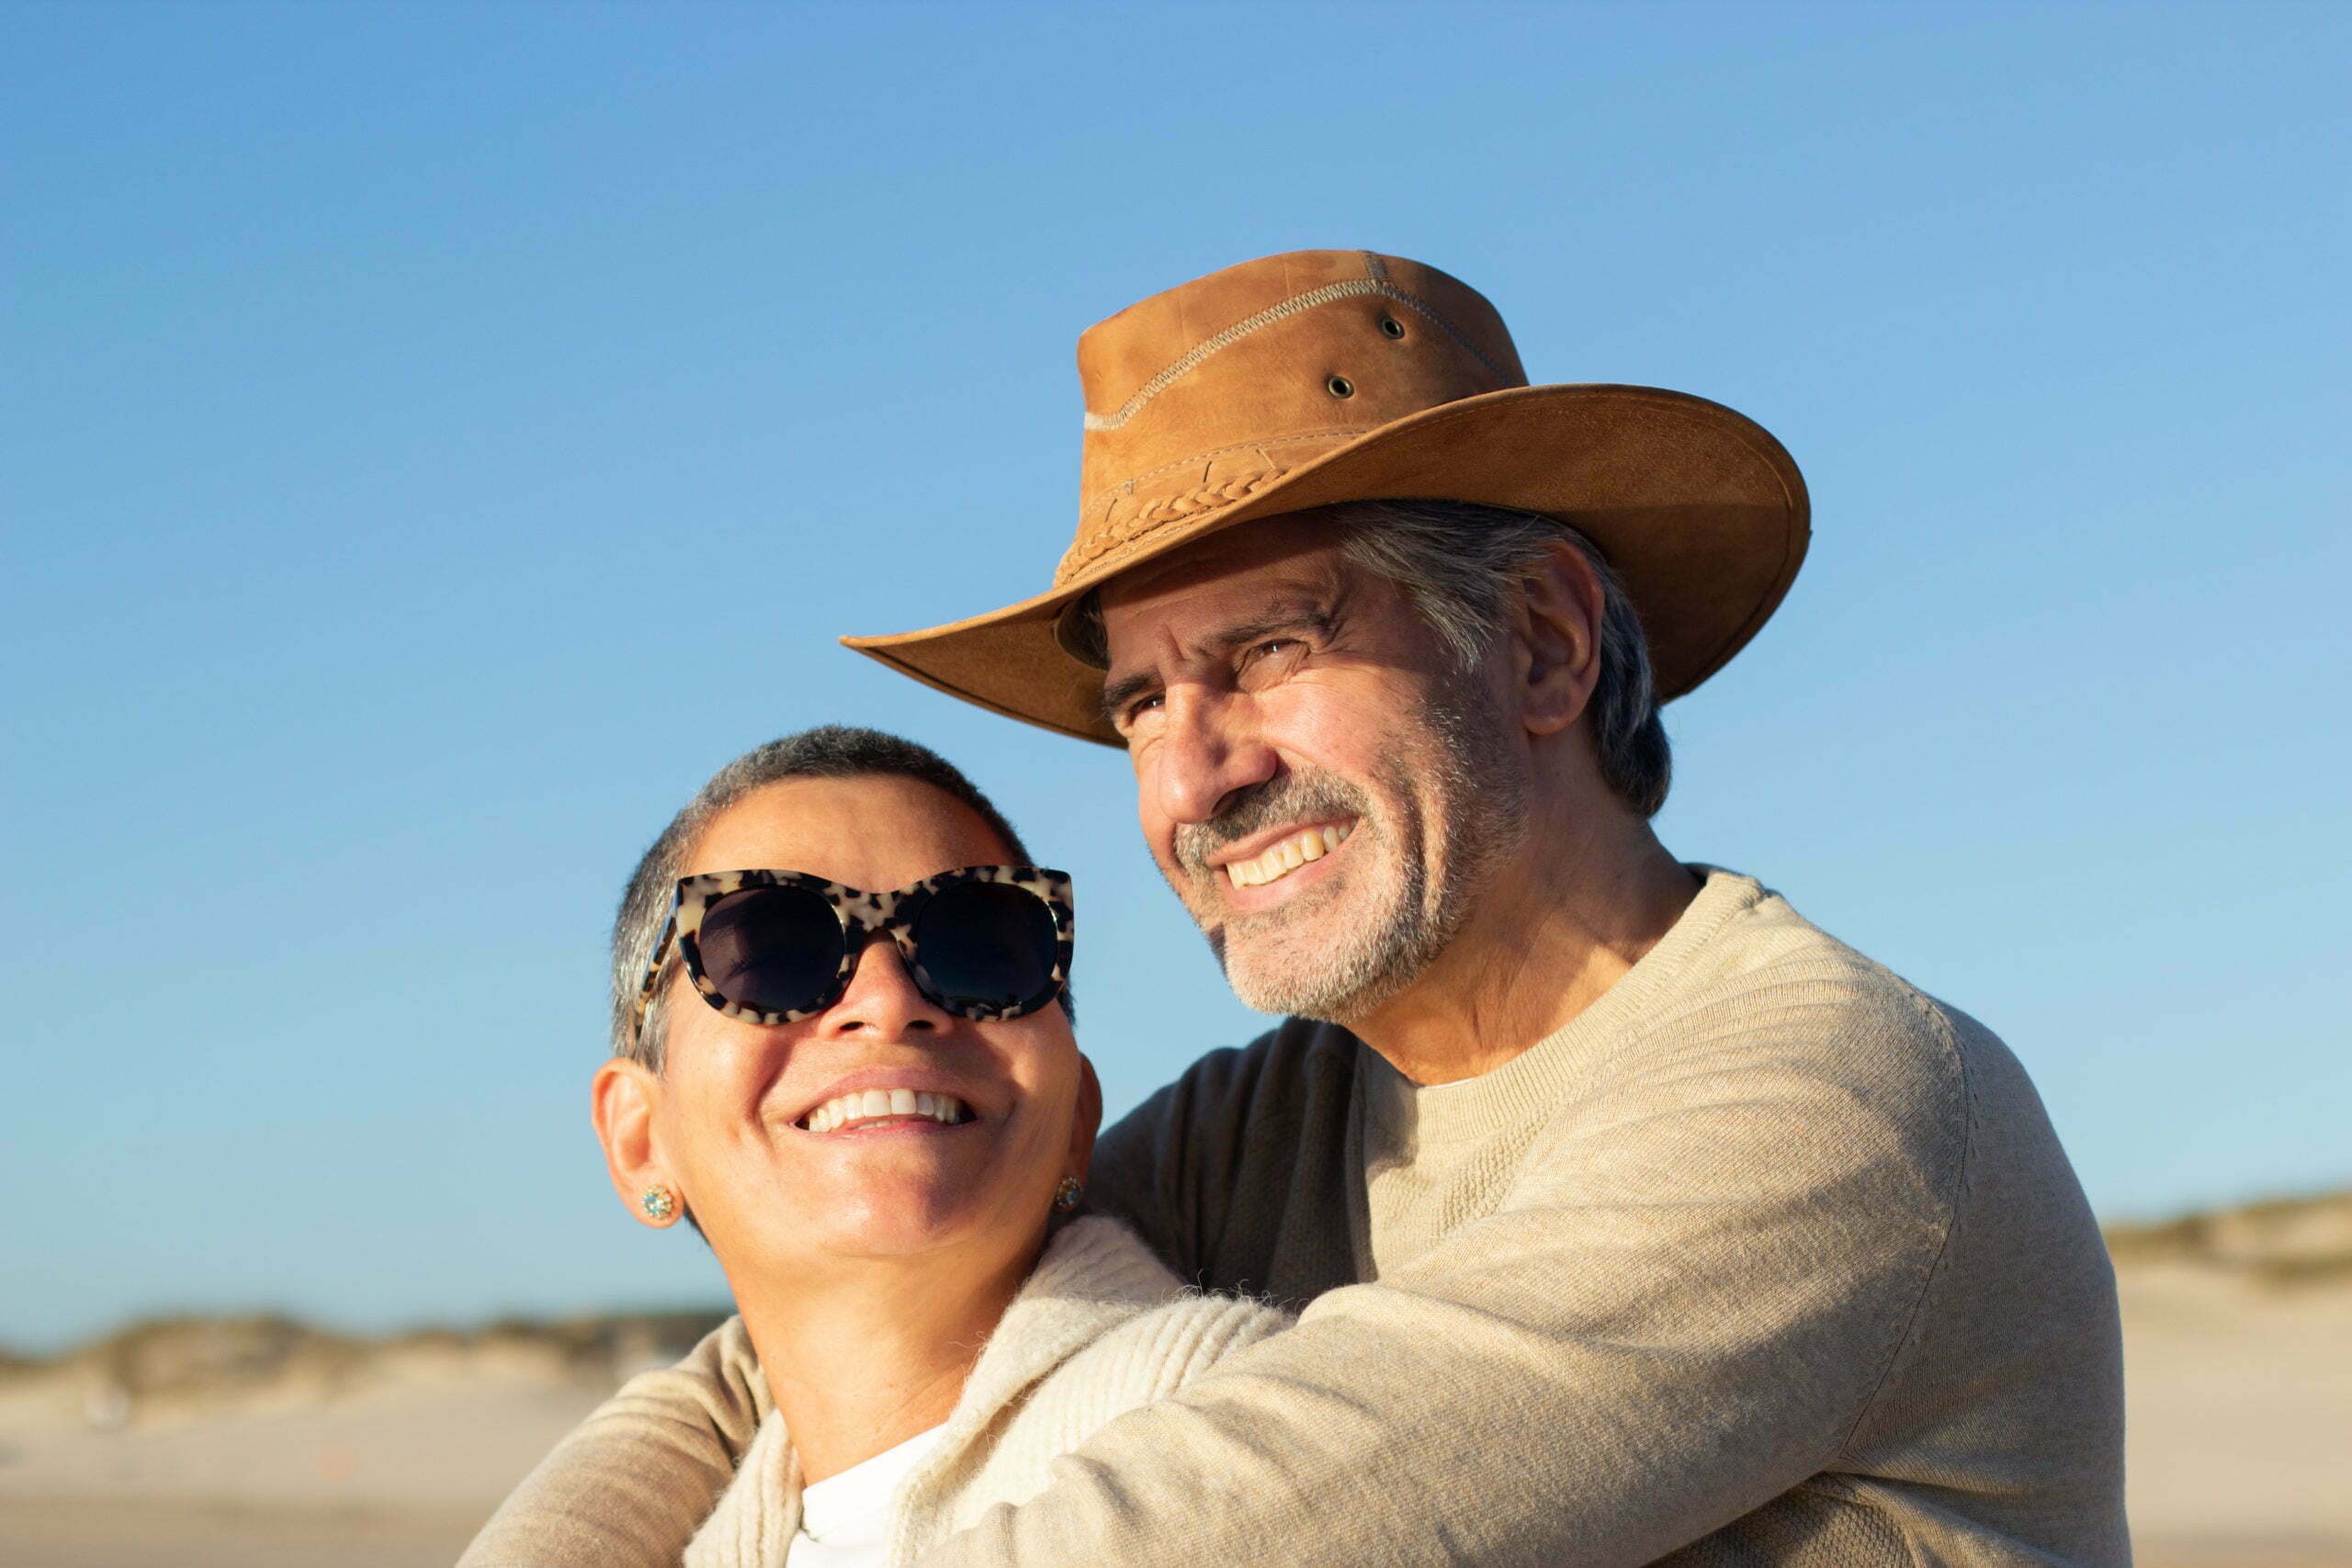 Portrait of beautiful senior couple spending time together outdoors on sunny day. Handsome smiling grey-haired man in cowboy hat hugging happy short-haired lady in sunglasses. Love, leisure concept